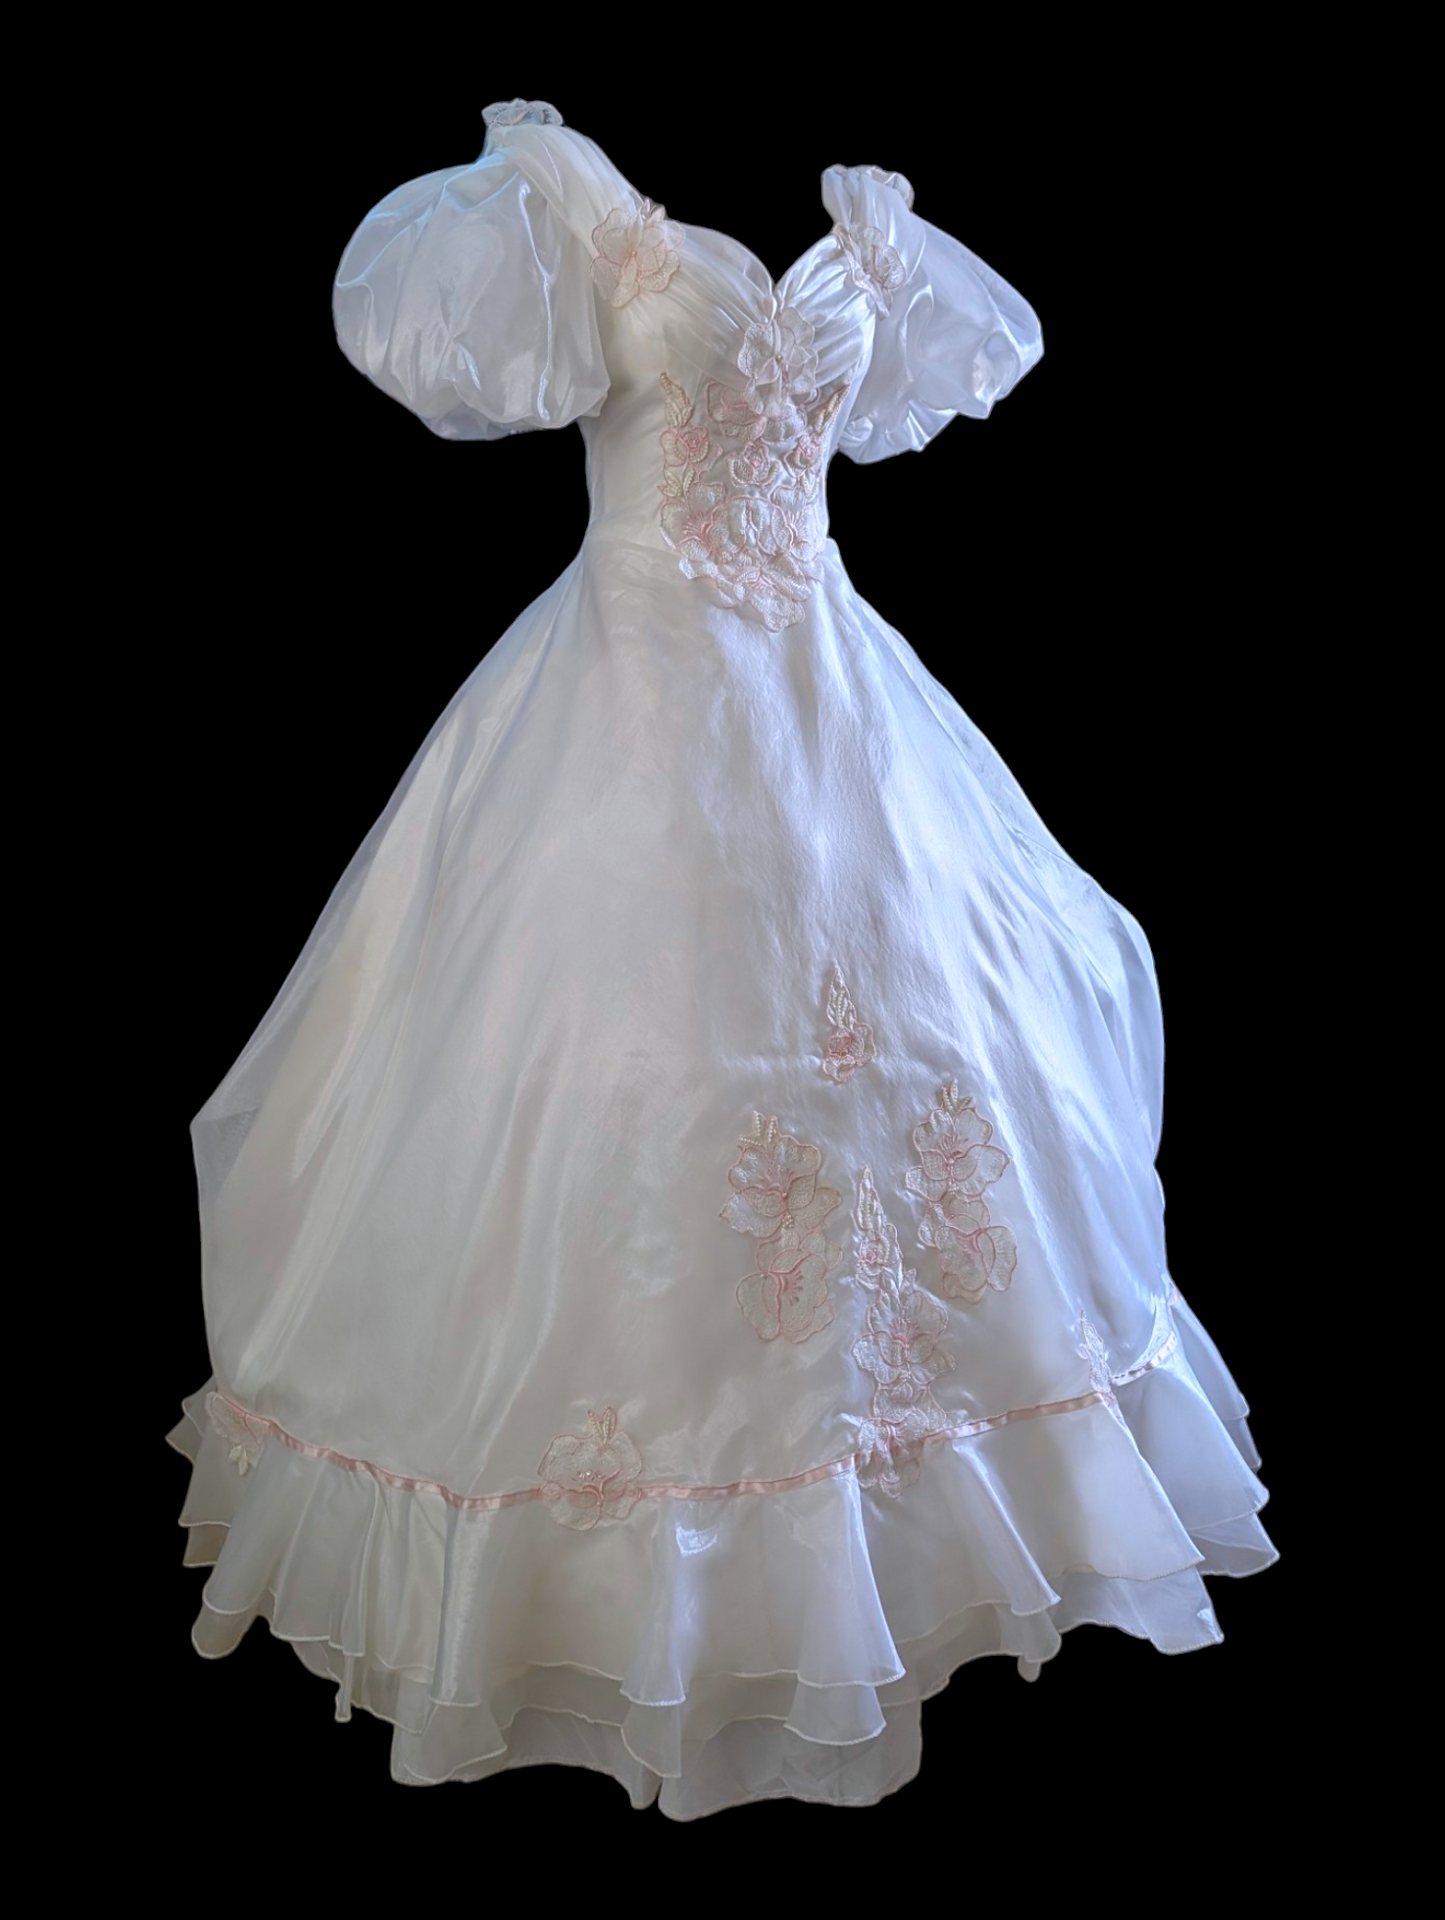 1980s Labyrinth Style Wedding Dress with Puff Sleeves, Open Back and Long Train